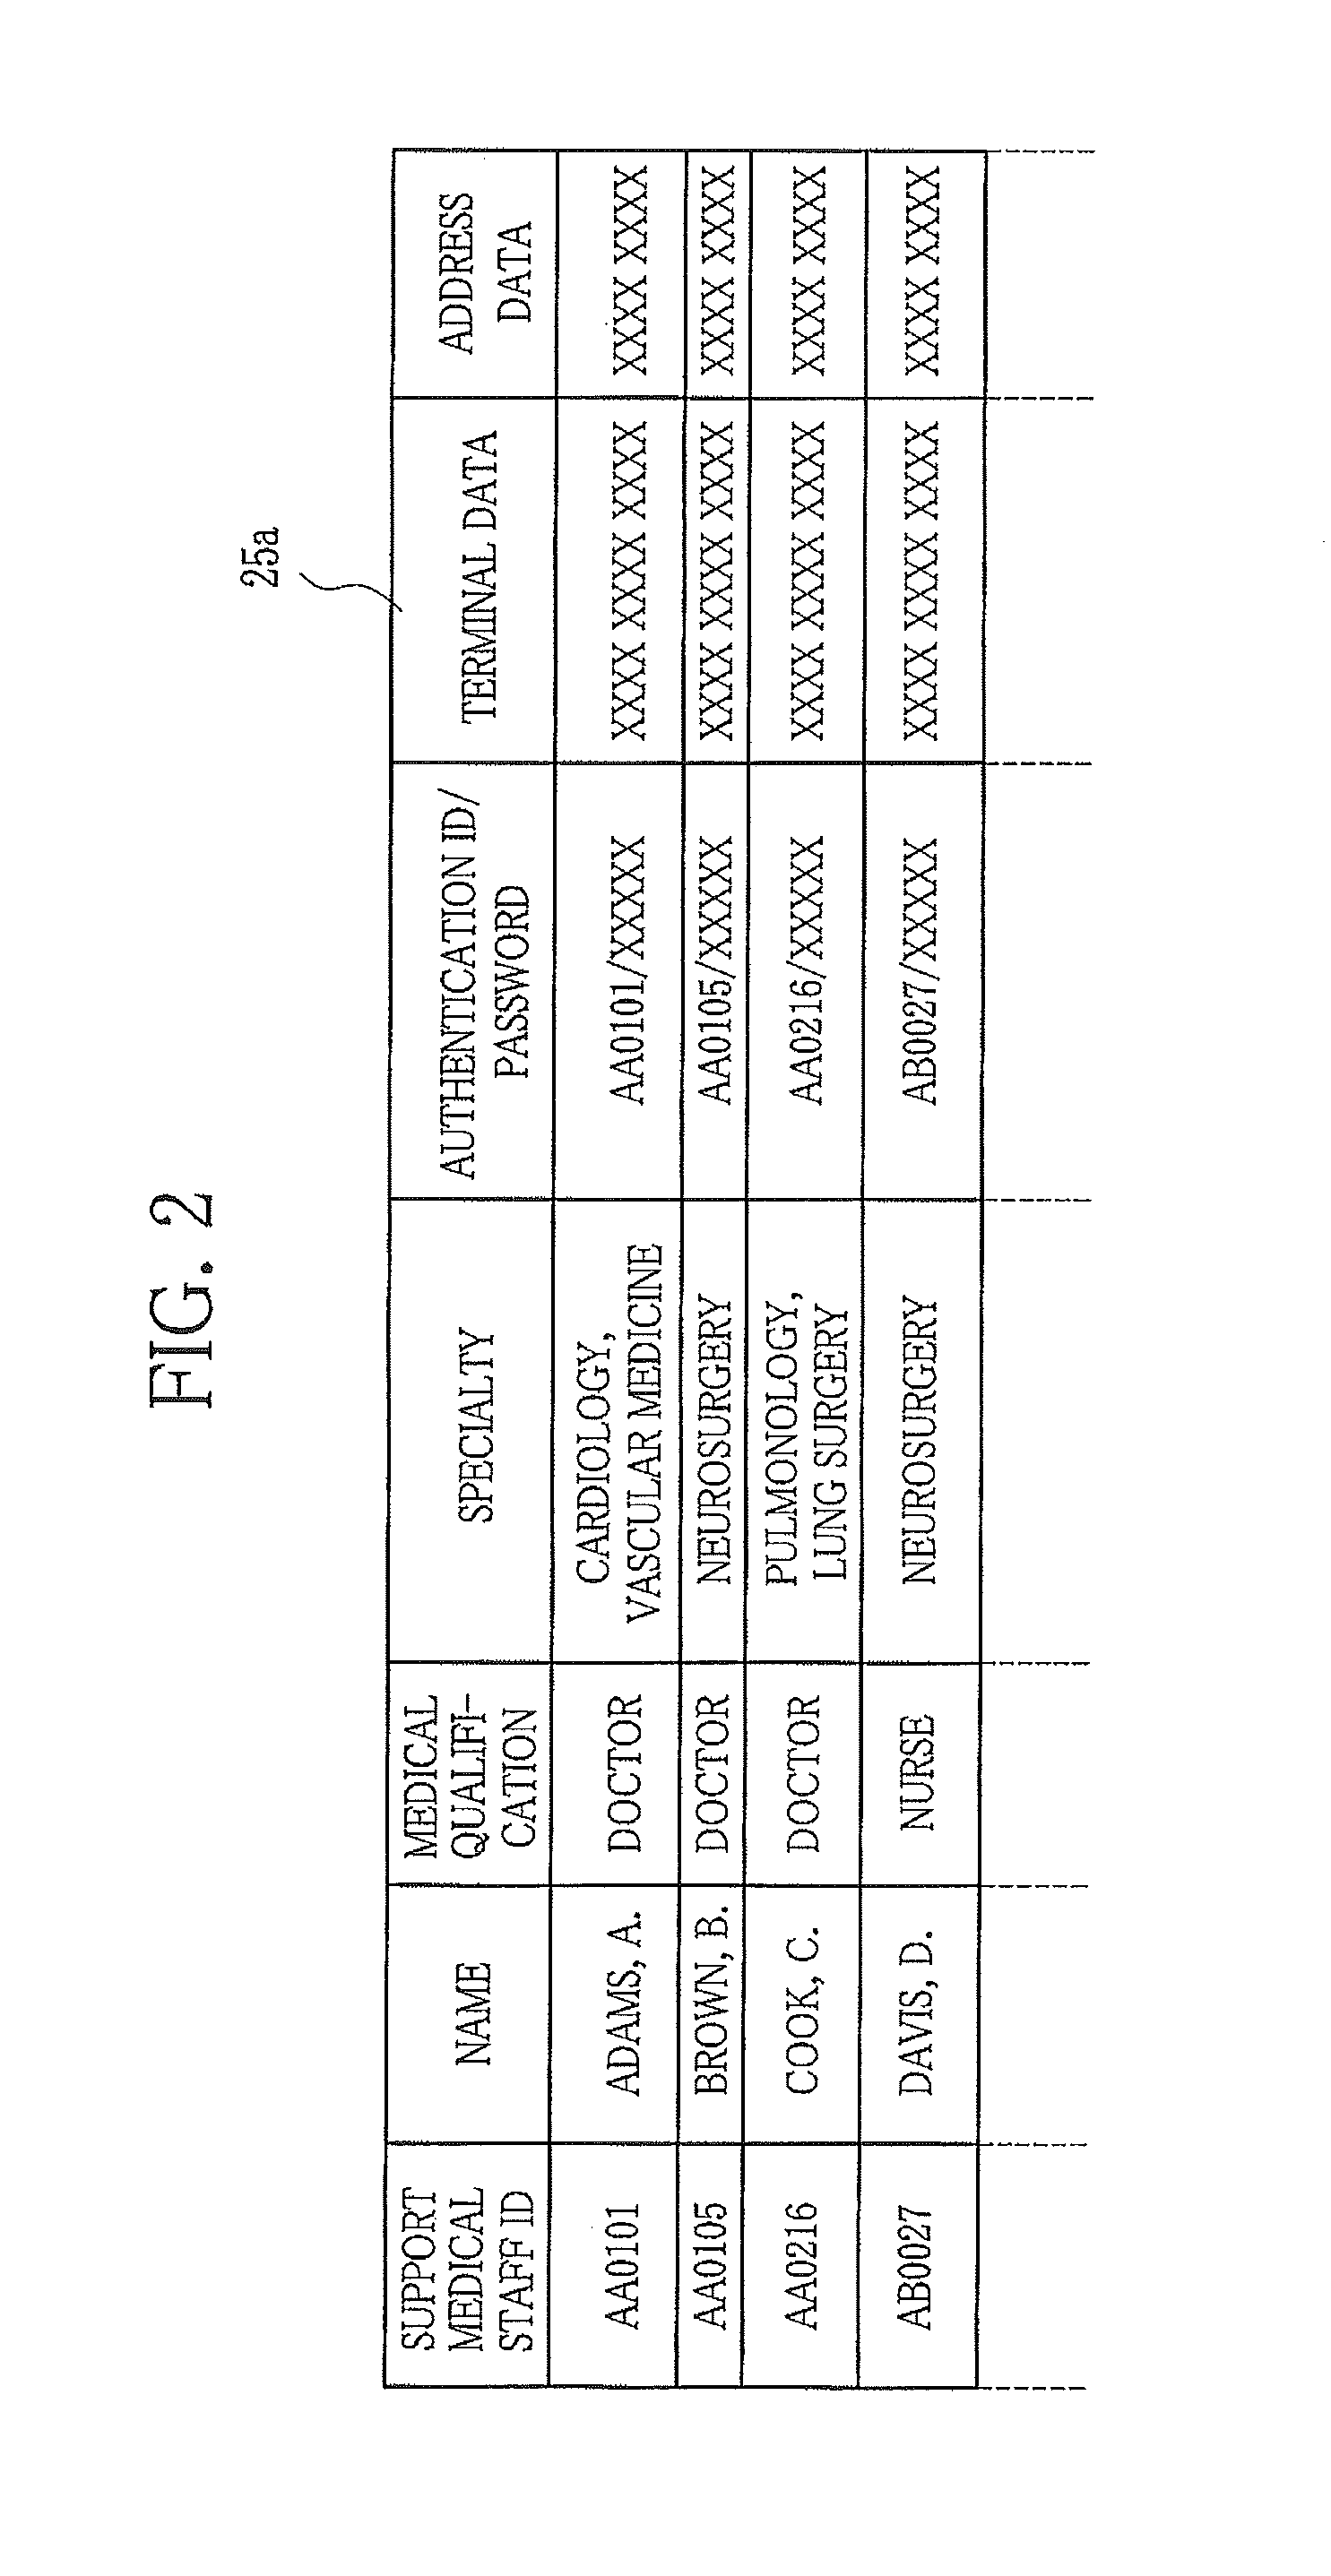 Apparatus and method for providing medical support